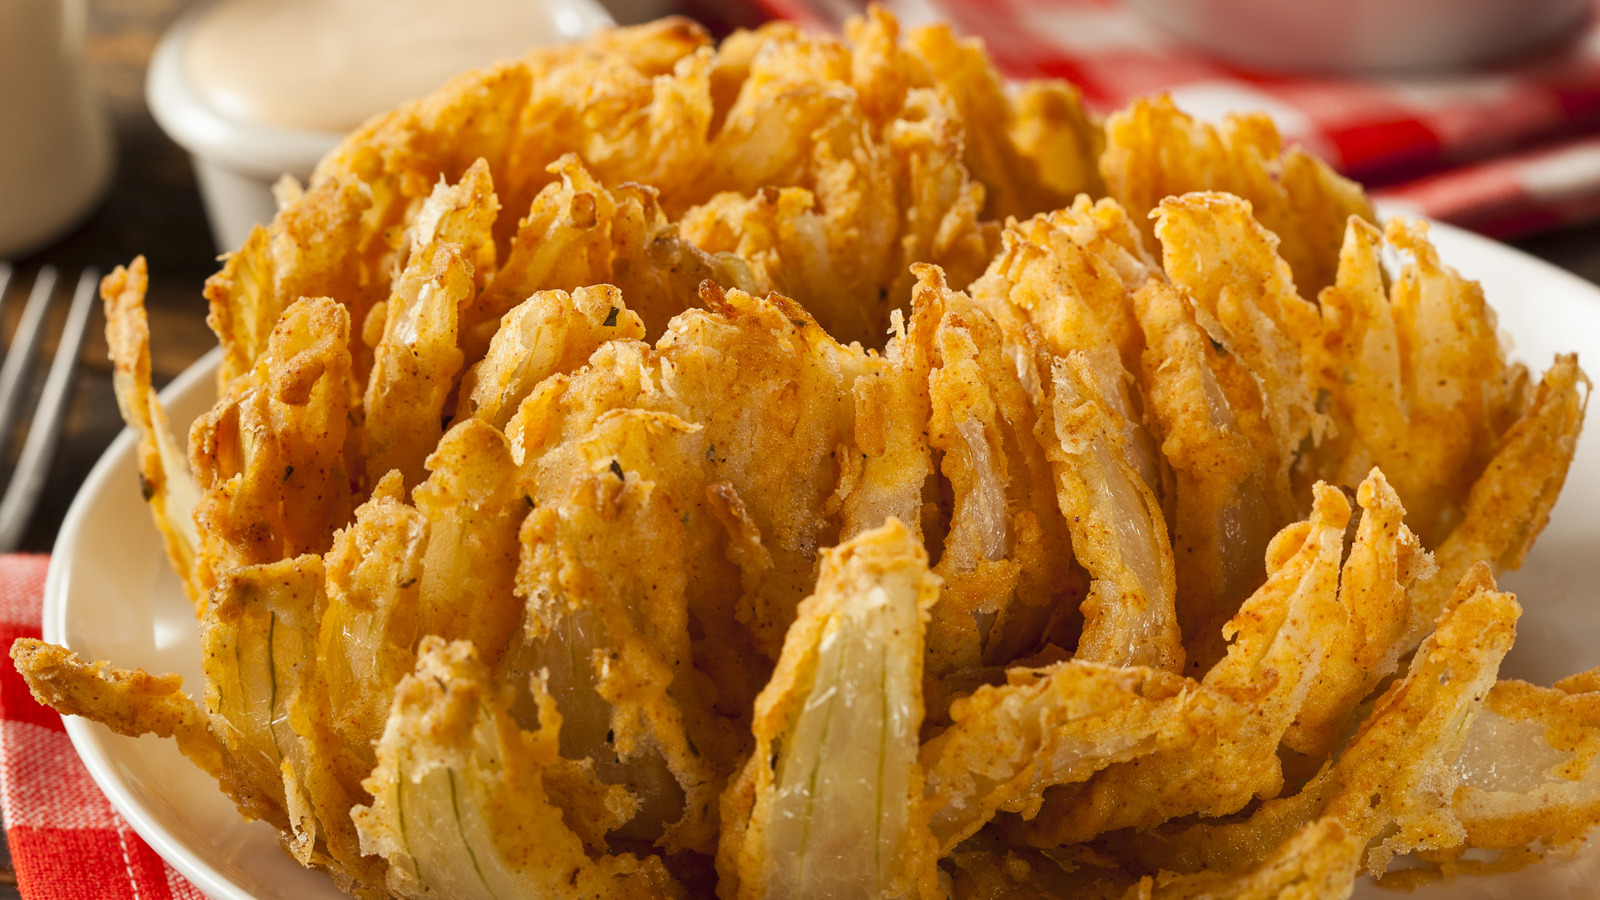 Outback Steakhouse Is Celebrating National Onion Day With Free Bloomin’ Onions – The Daily Meal